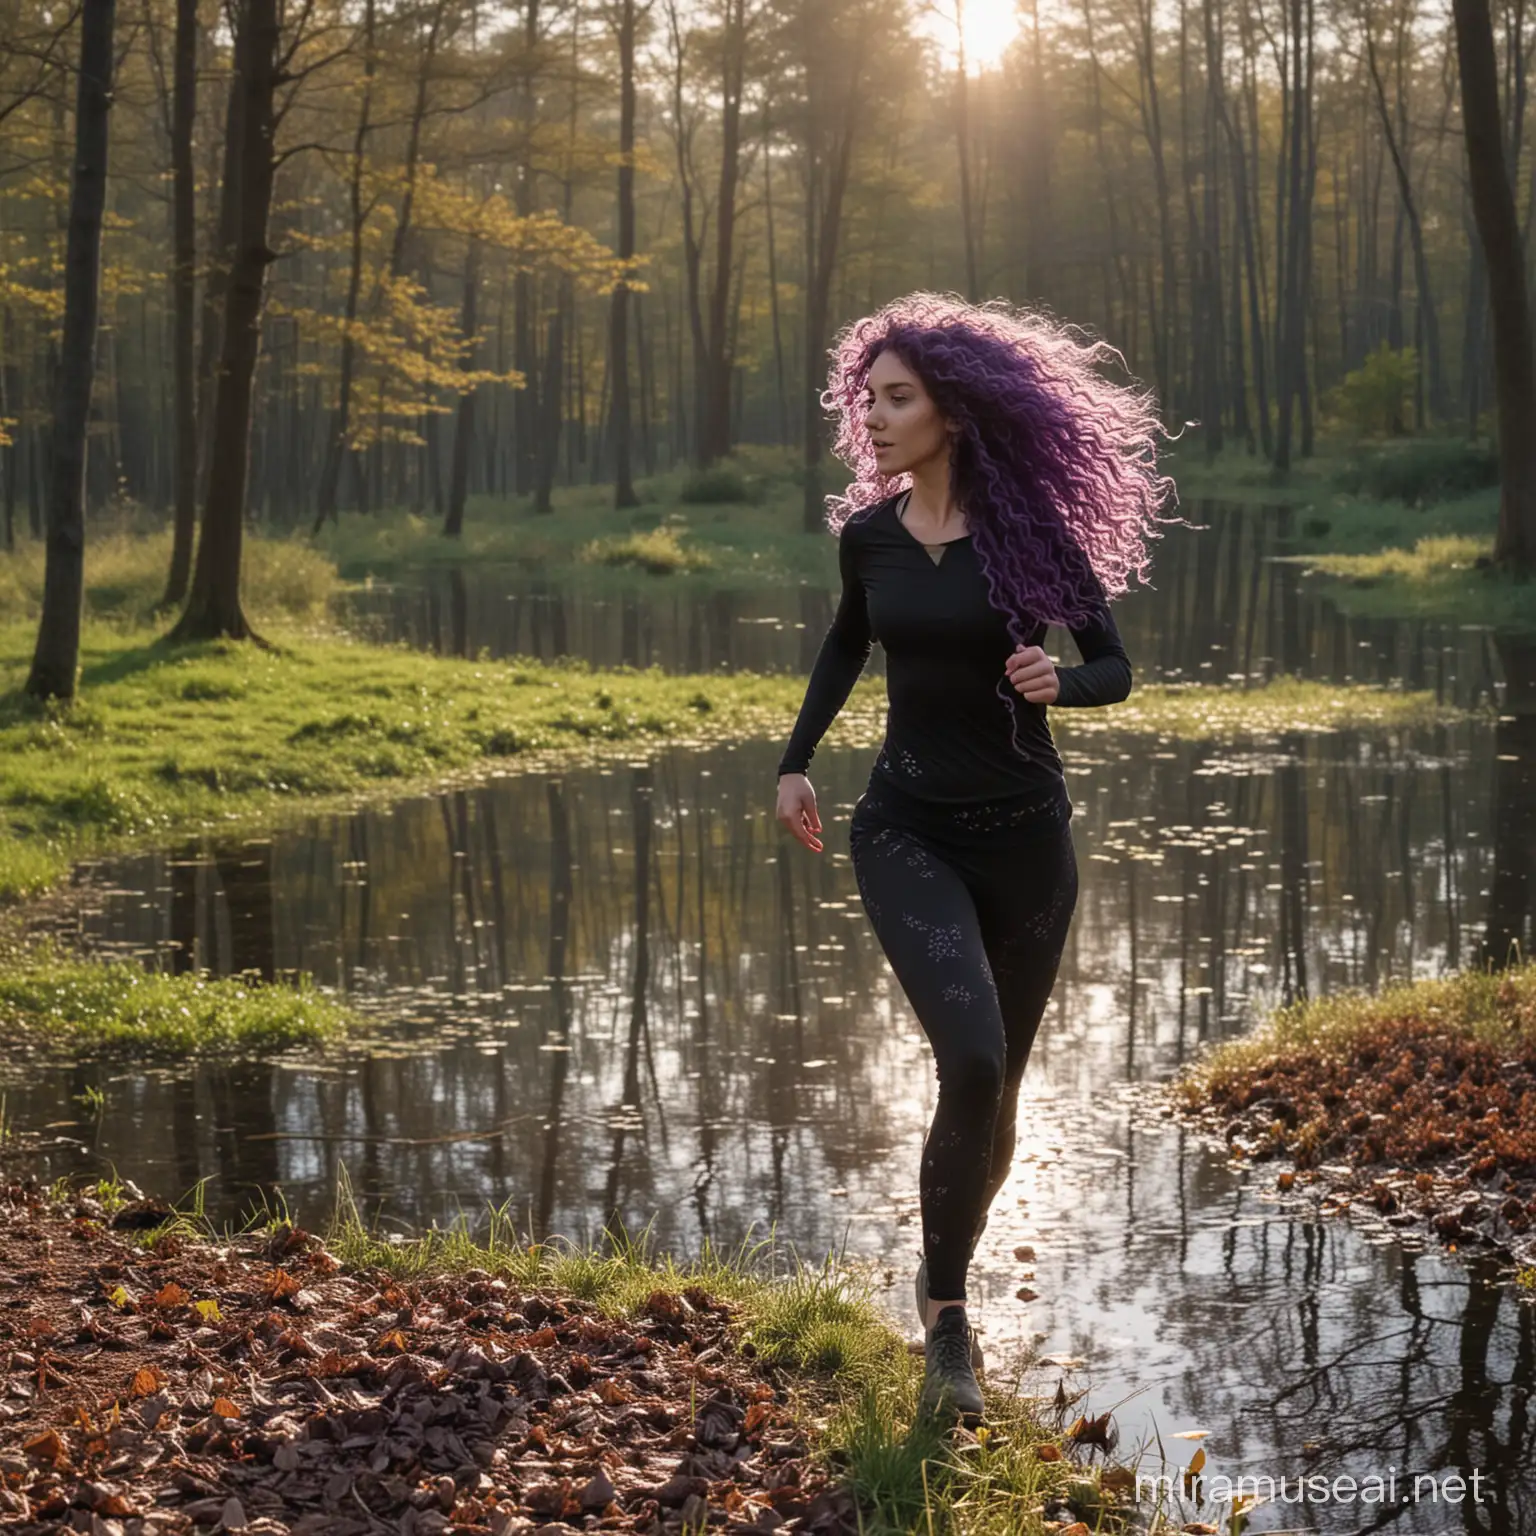 Girl with curly long purple hair, black unicorn, forest glade, forest lake, running, spring leaves on trees, early morning